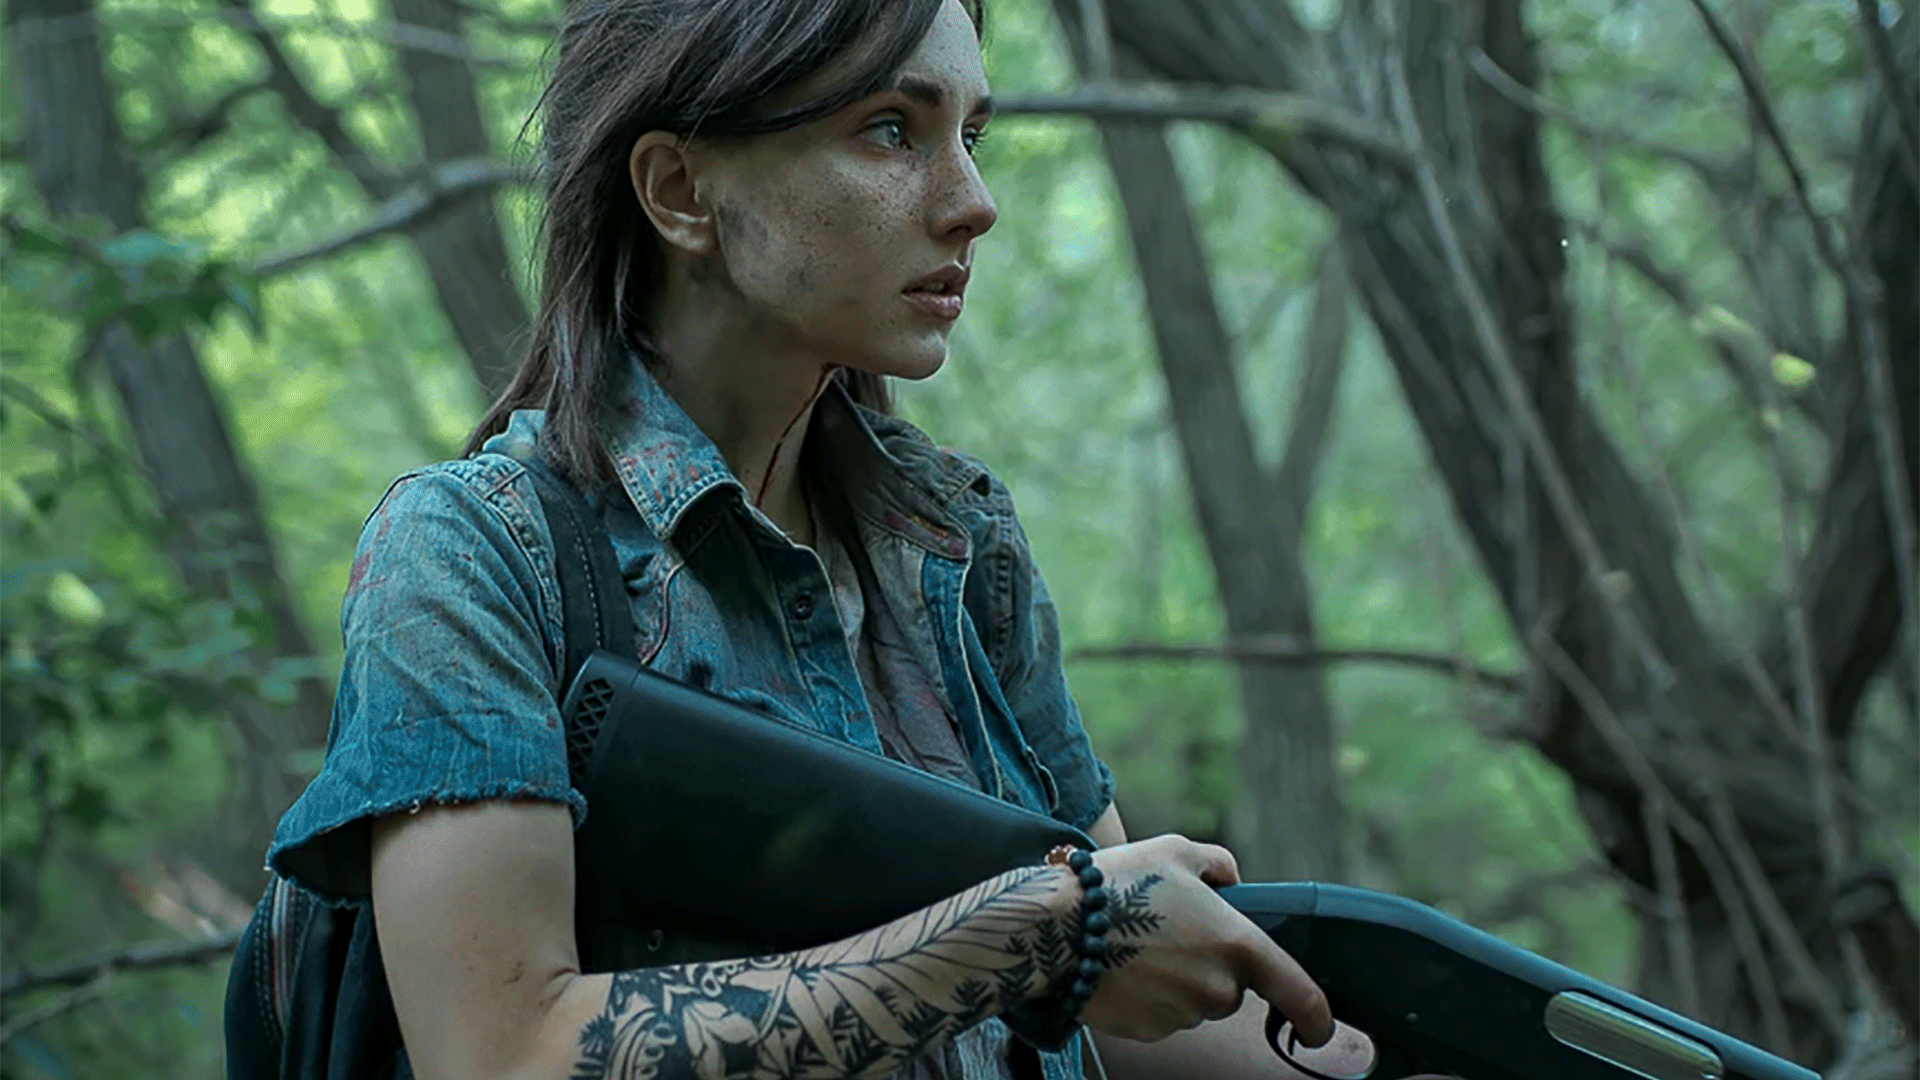 Last Of Us 2 Cosplay Sure Gets The Setting Right